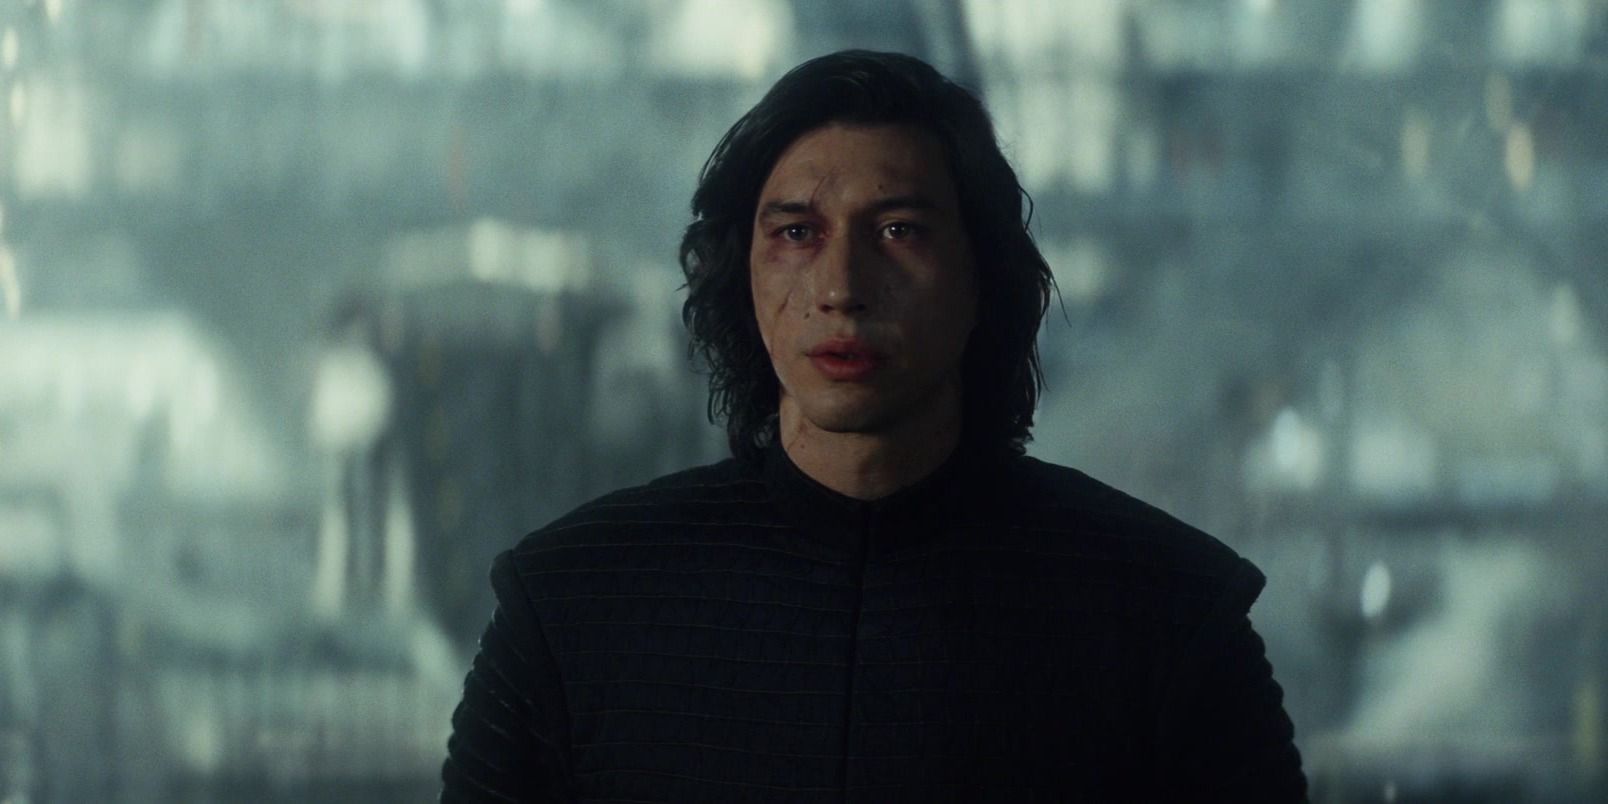 Kylo Ren with visible injuries looking upset in The Last Jedi